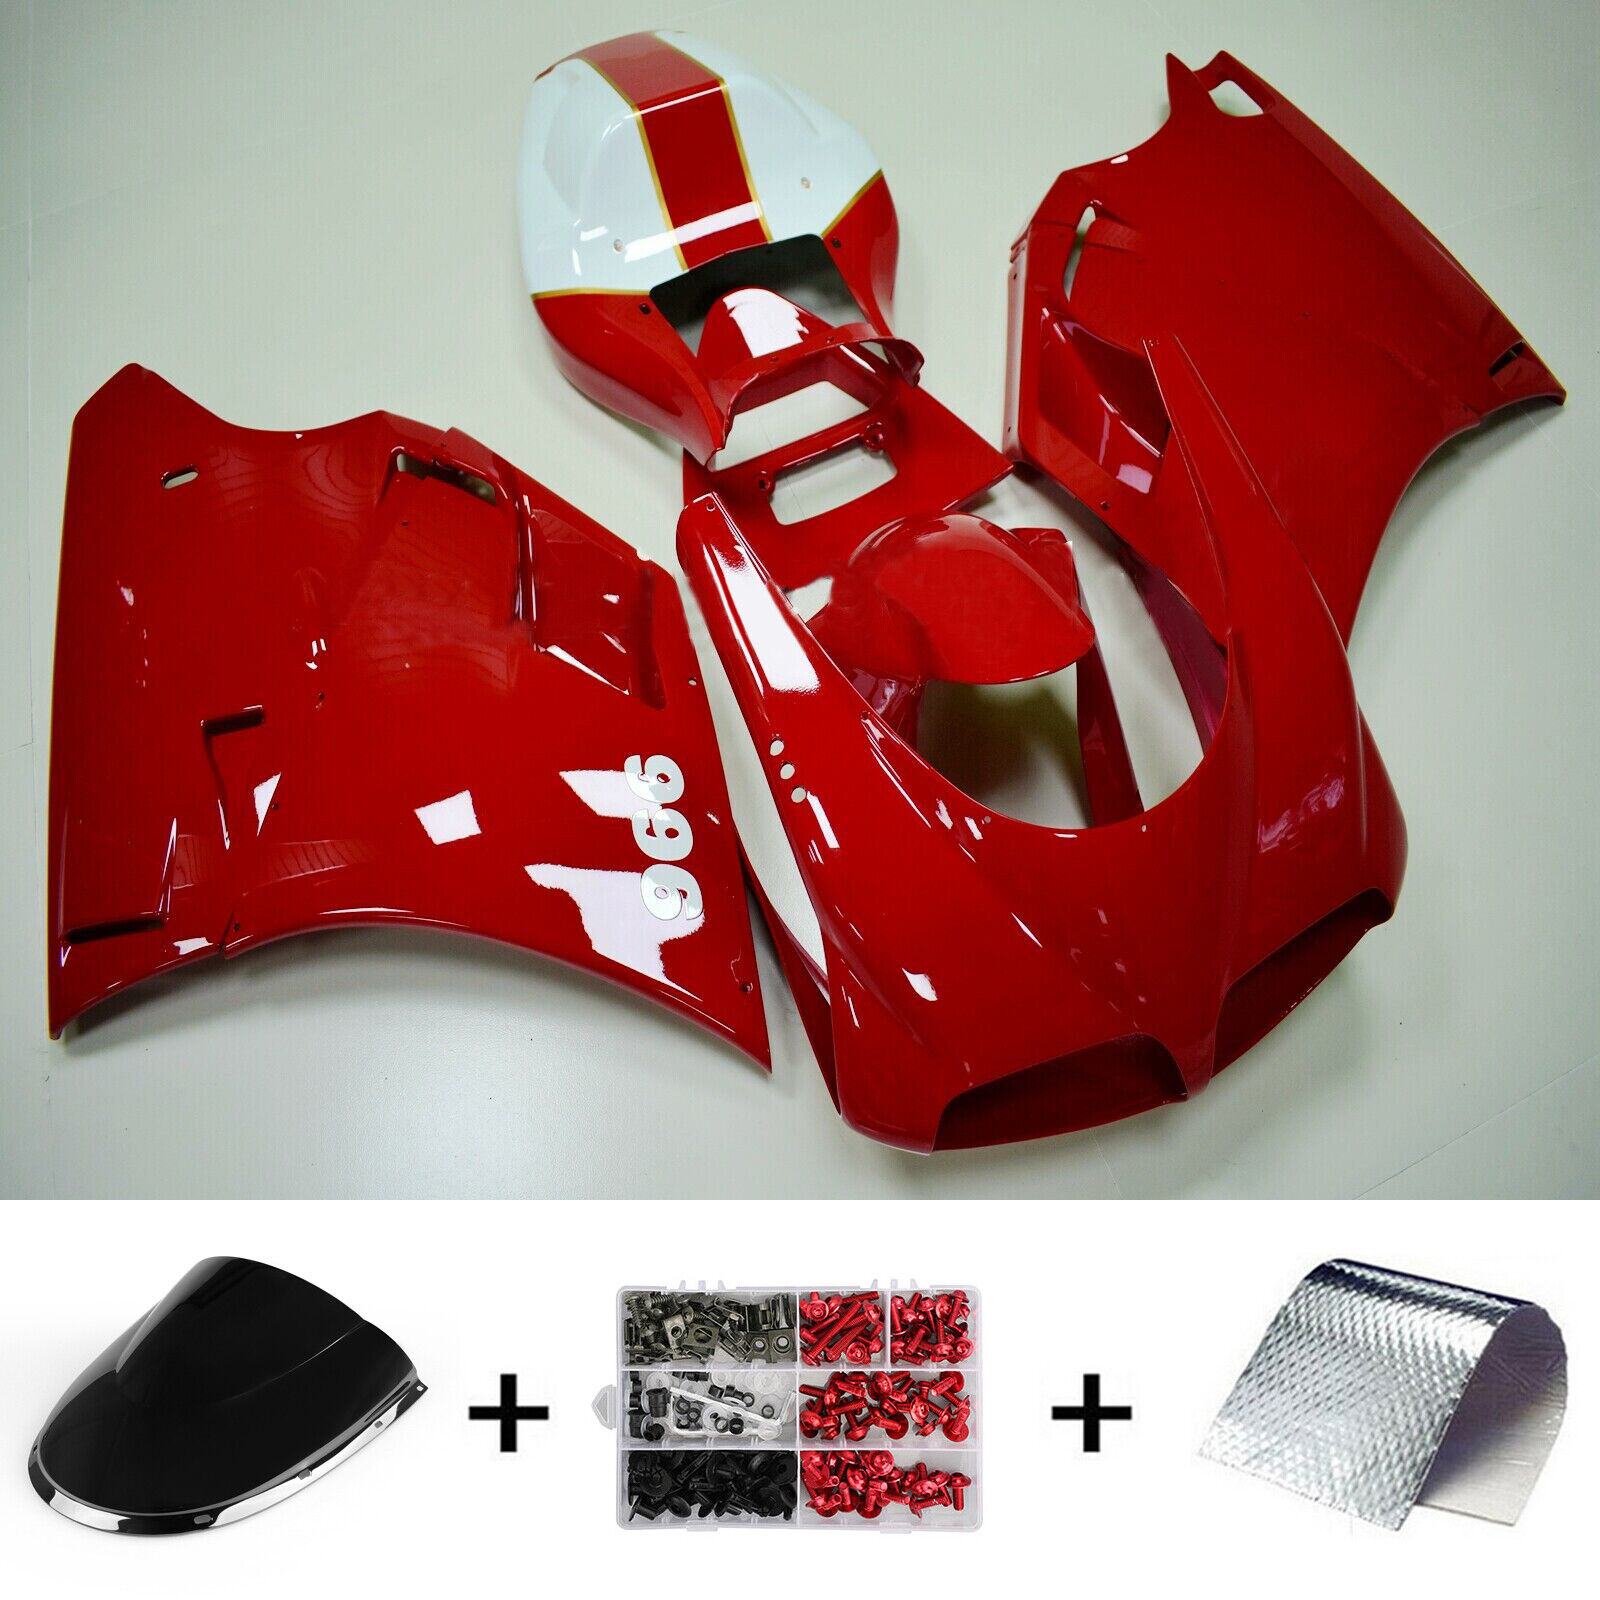 NEW 1× ABS Injection Fairing Bodywork Kit Fits for Ducati 996/748 1996-2002 USA